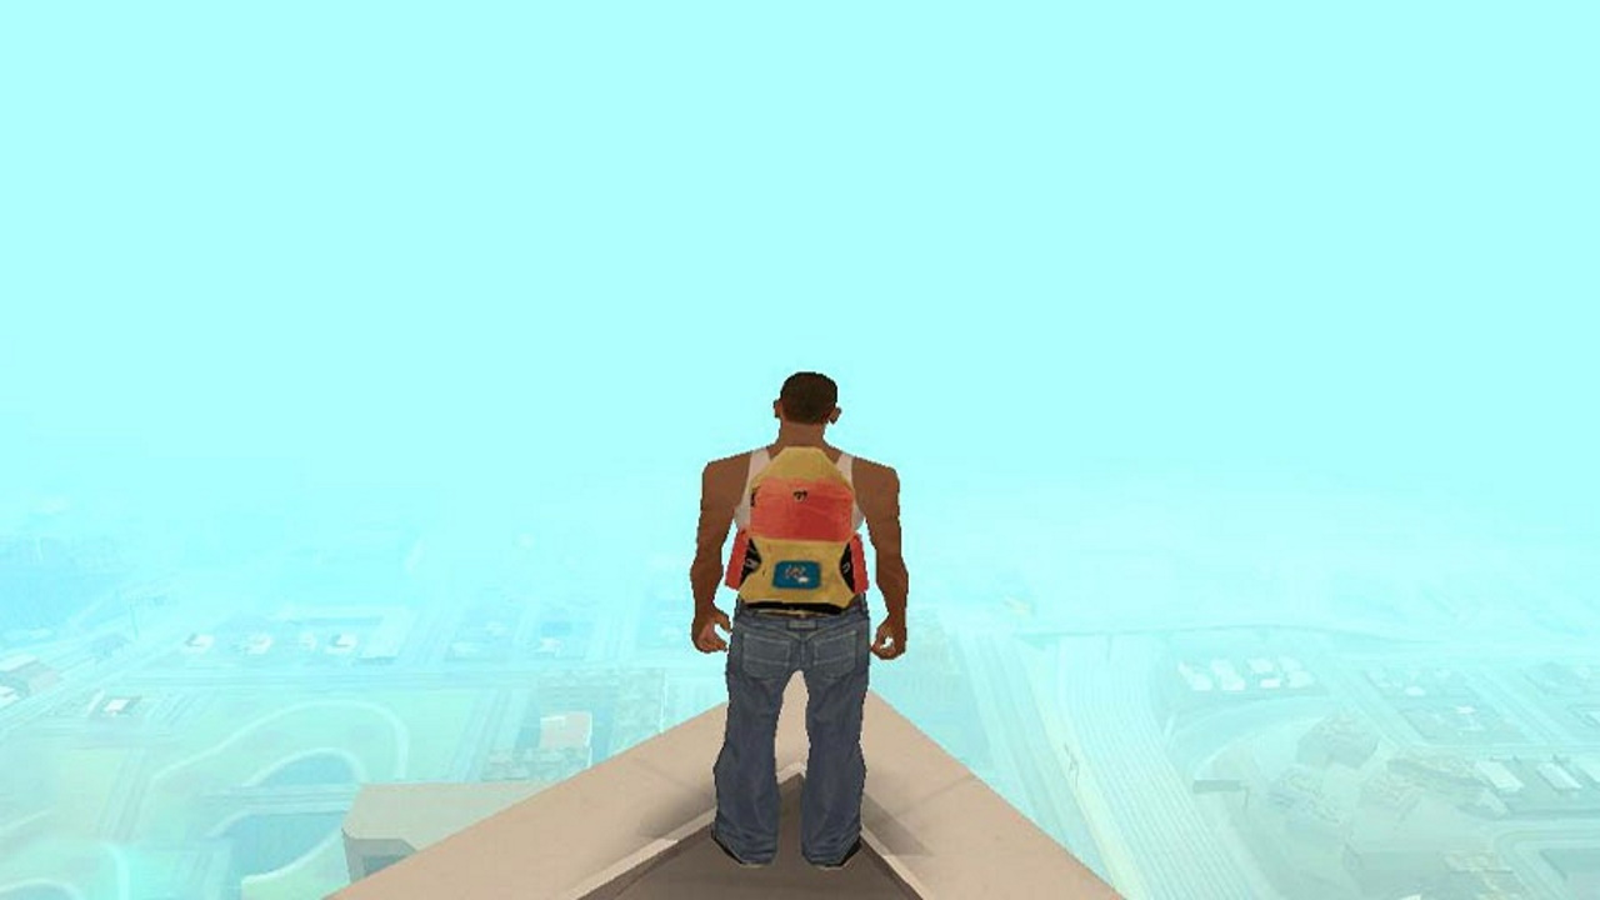 How to get jetpack in GTA San Andreas Definitive Edition